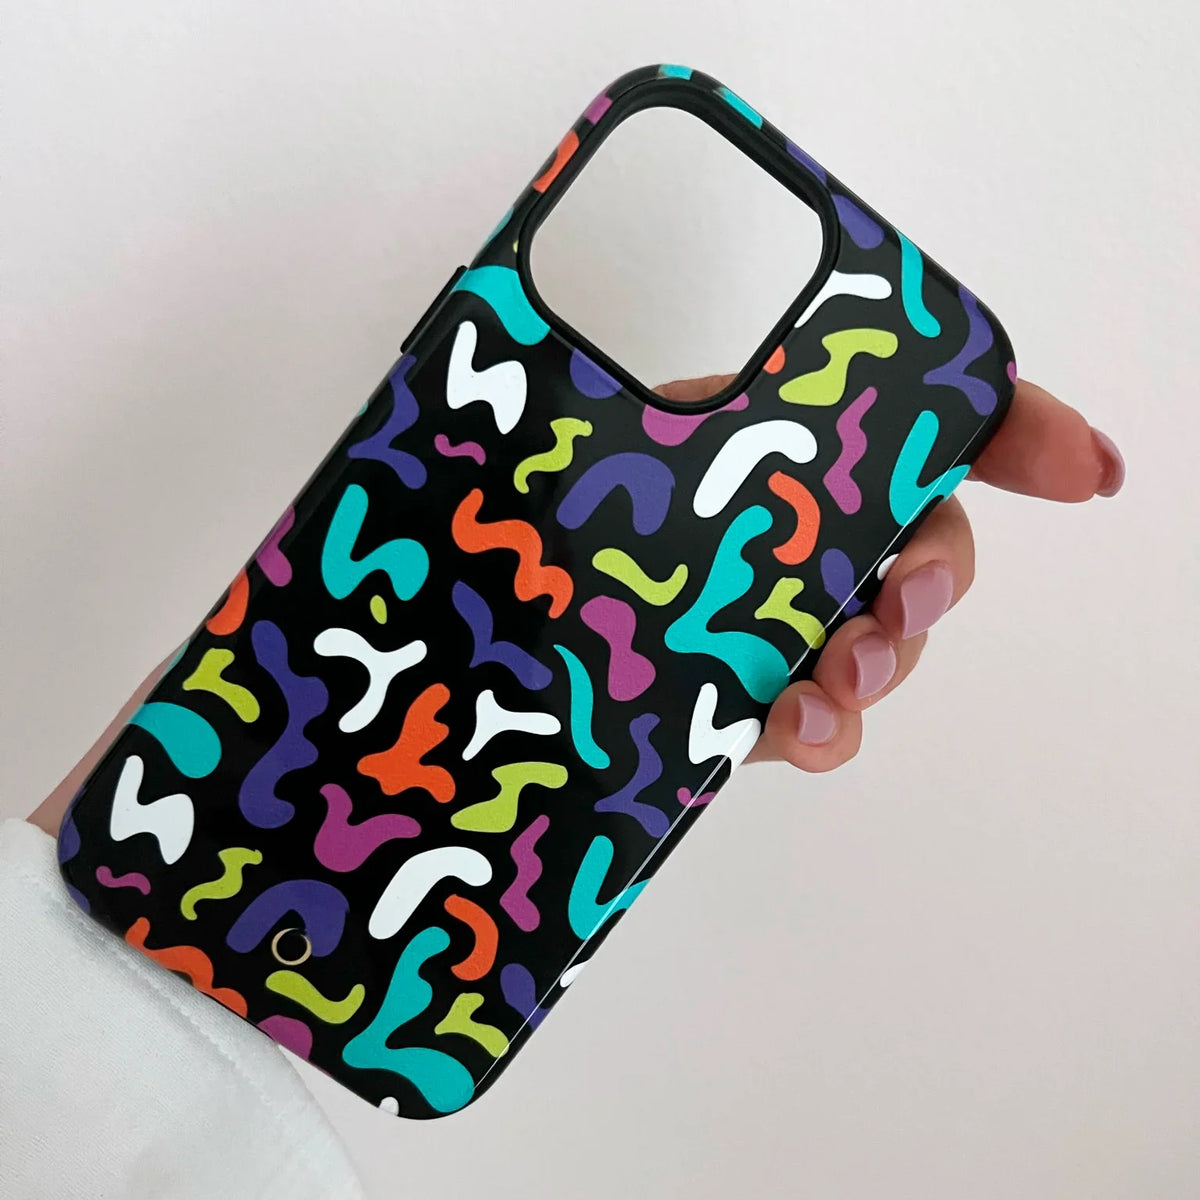 Chromatic Bliss iPhone Case - Select a Device